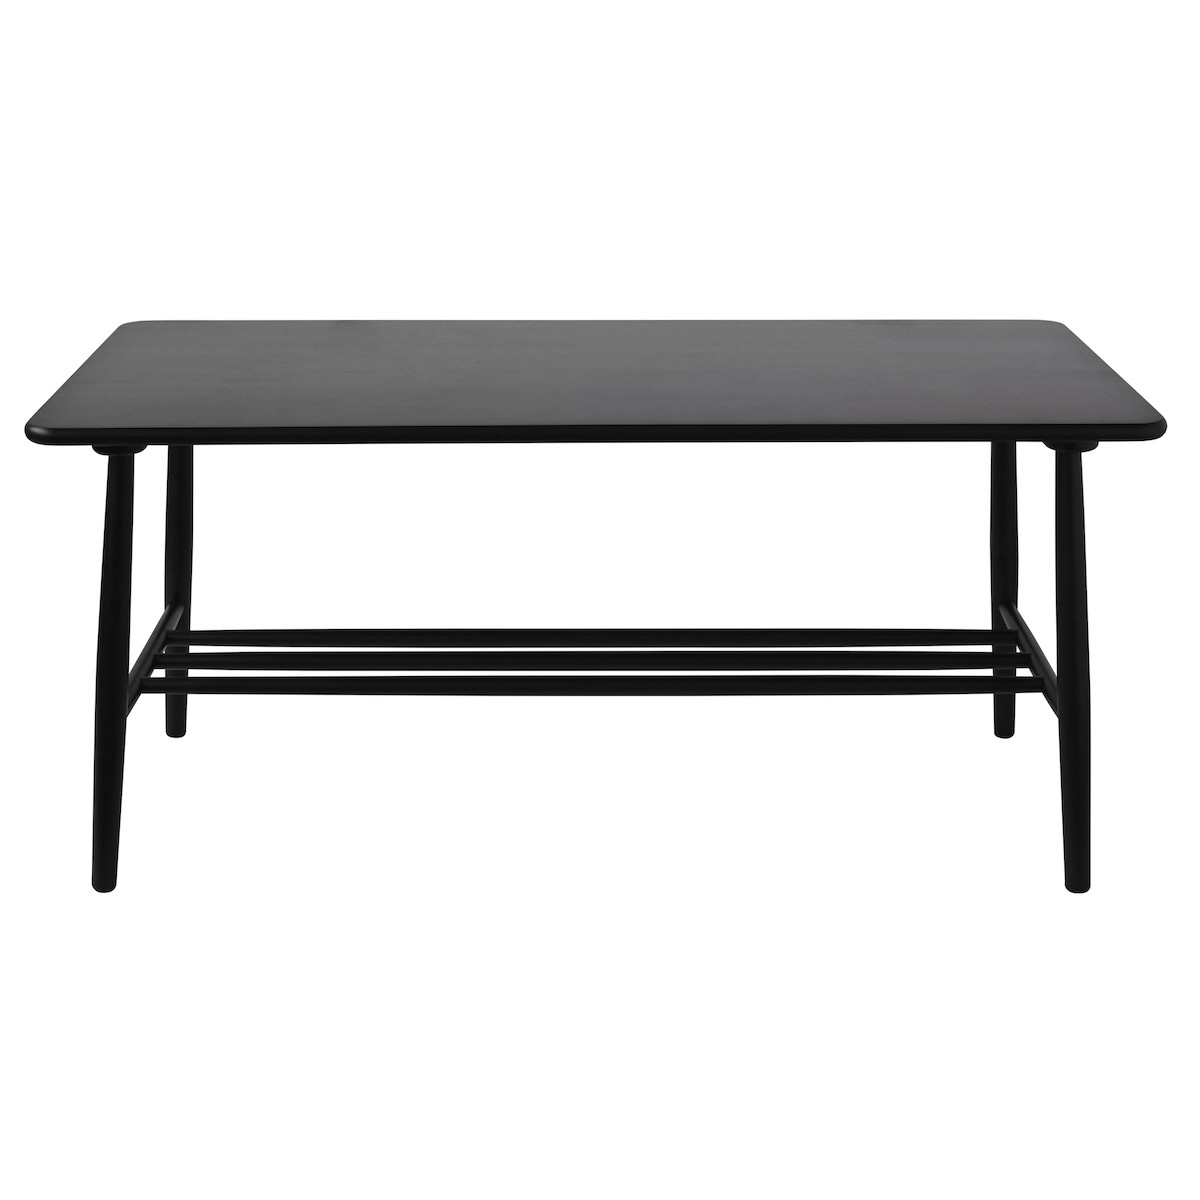 SOLD OUT black D20 coffee table - 120x55cm